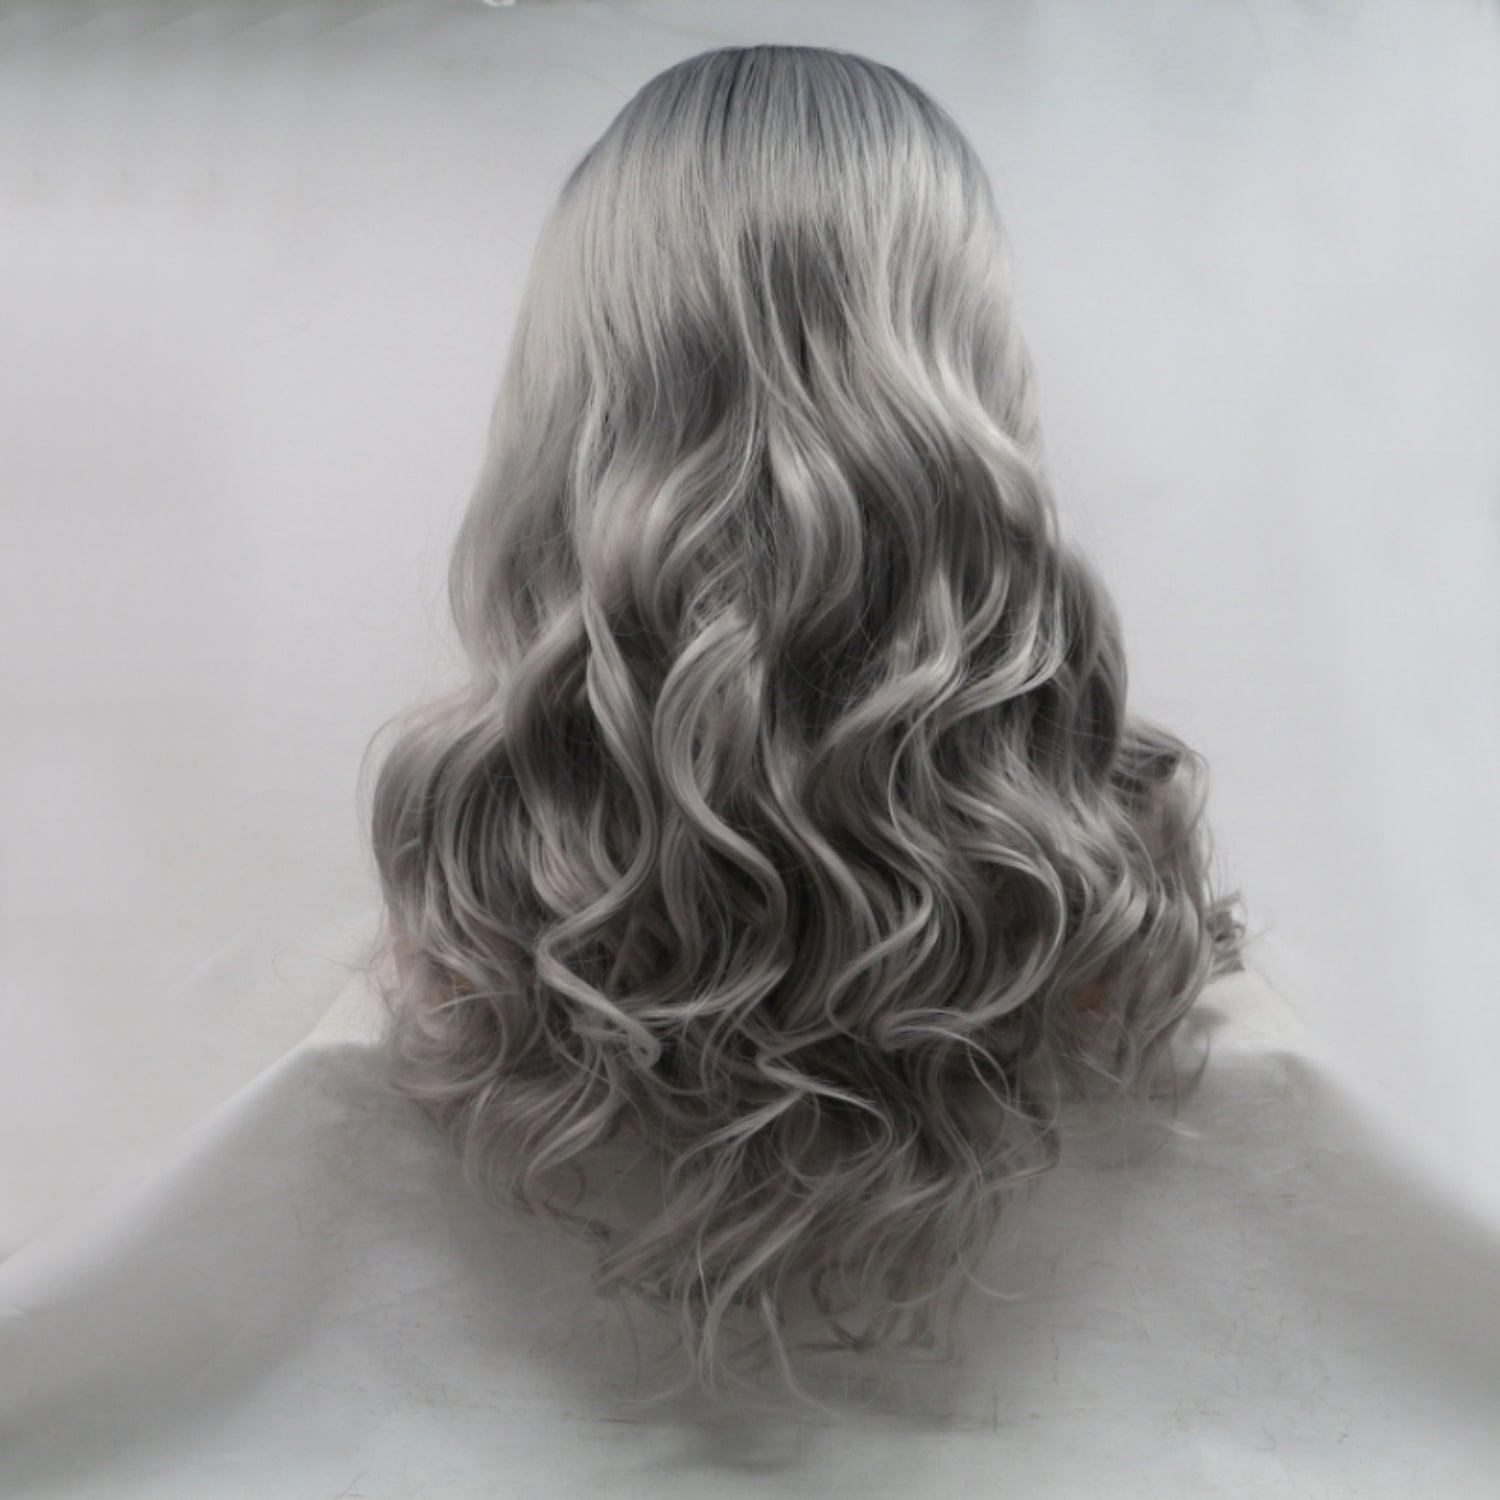 the back of a woman's head with grey hair